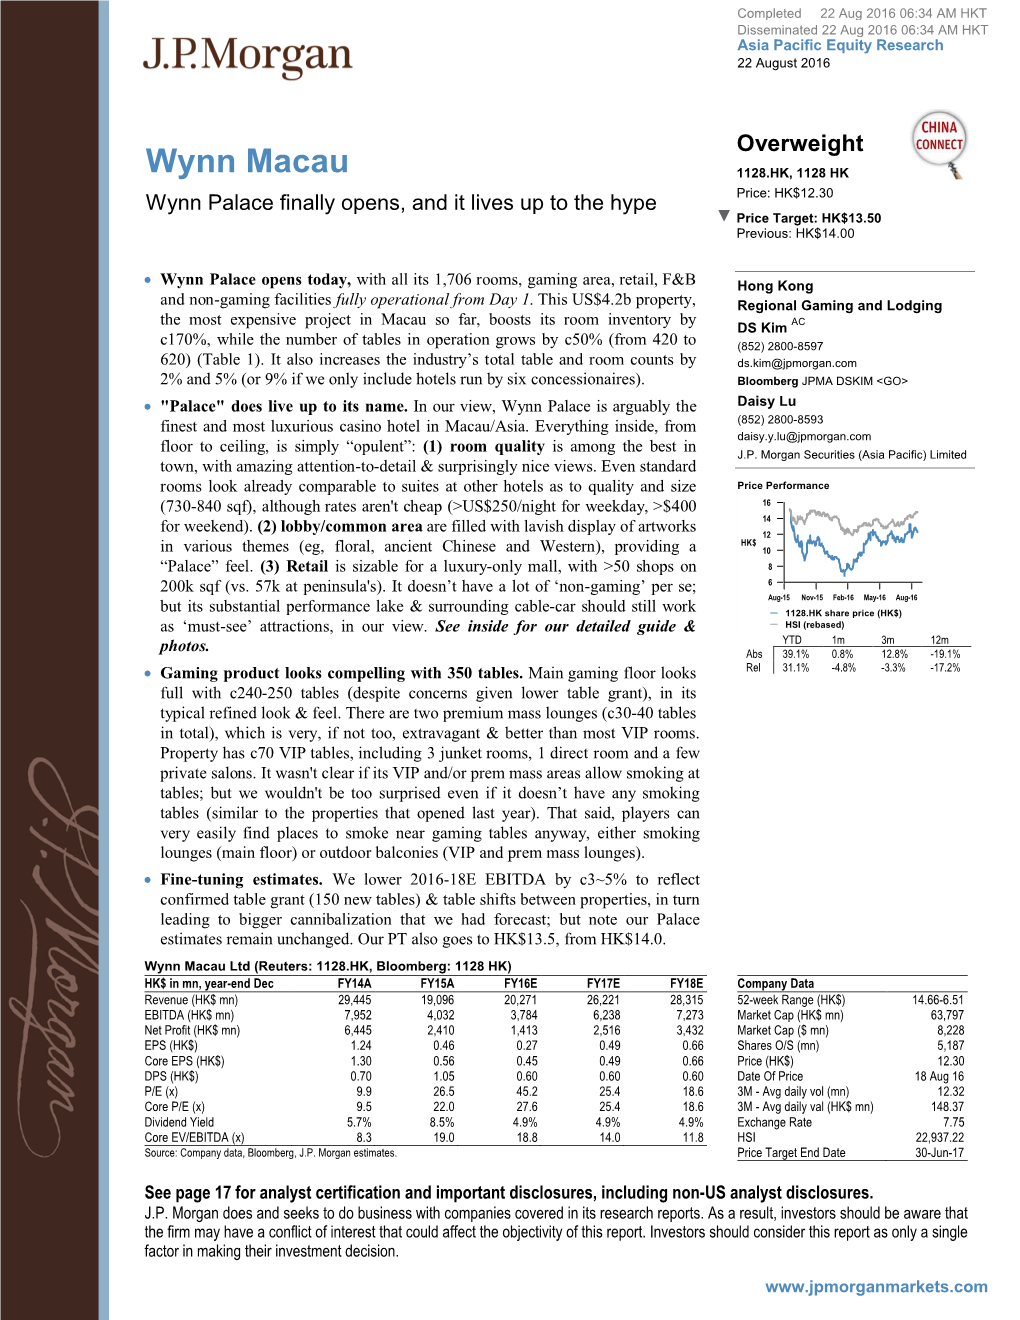 Wynn Macau 1128.HK, 1128 HK Wynn Palace Finally Opens, and It Lives up to the Hype Price: HK$12.30 ▼ Price Target: HK$13.50 Previous: HK$14.00